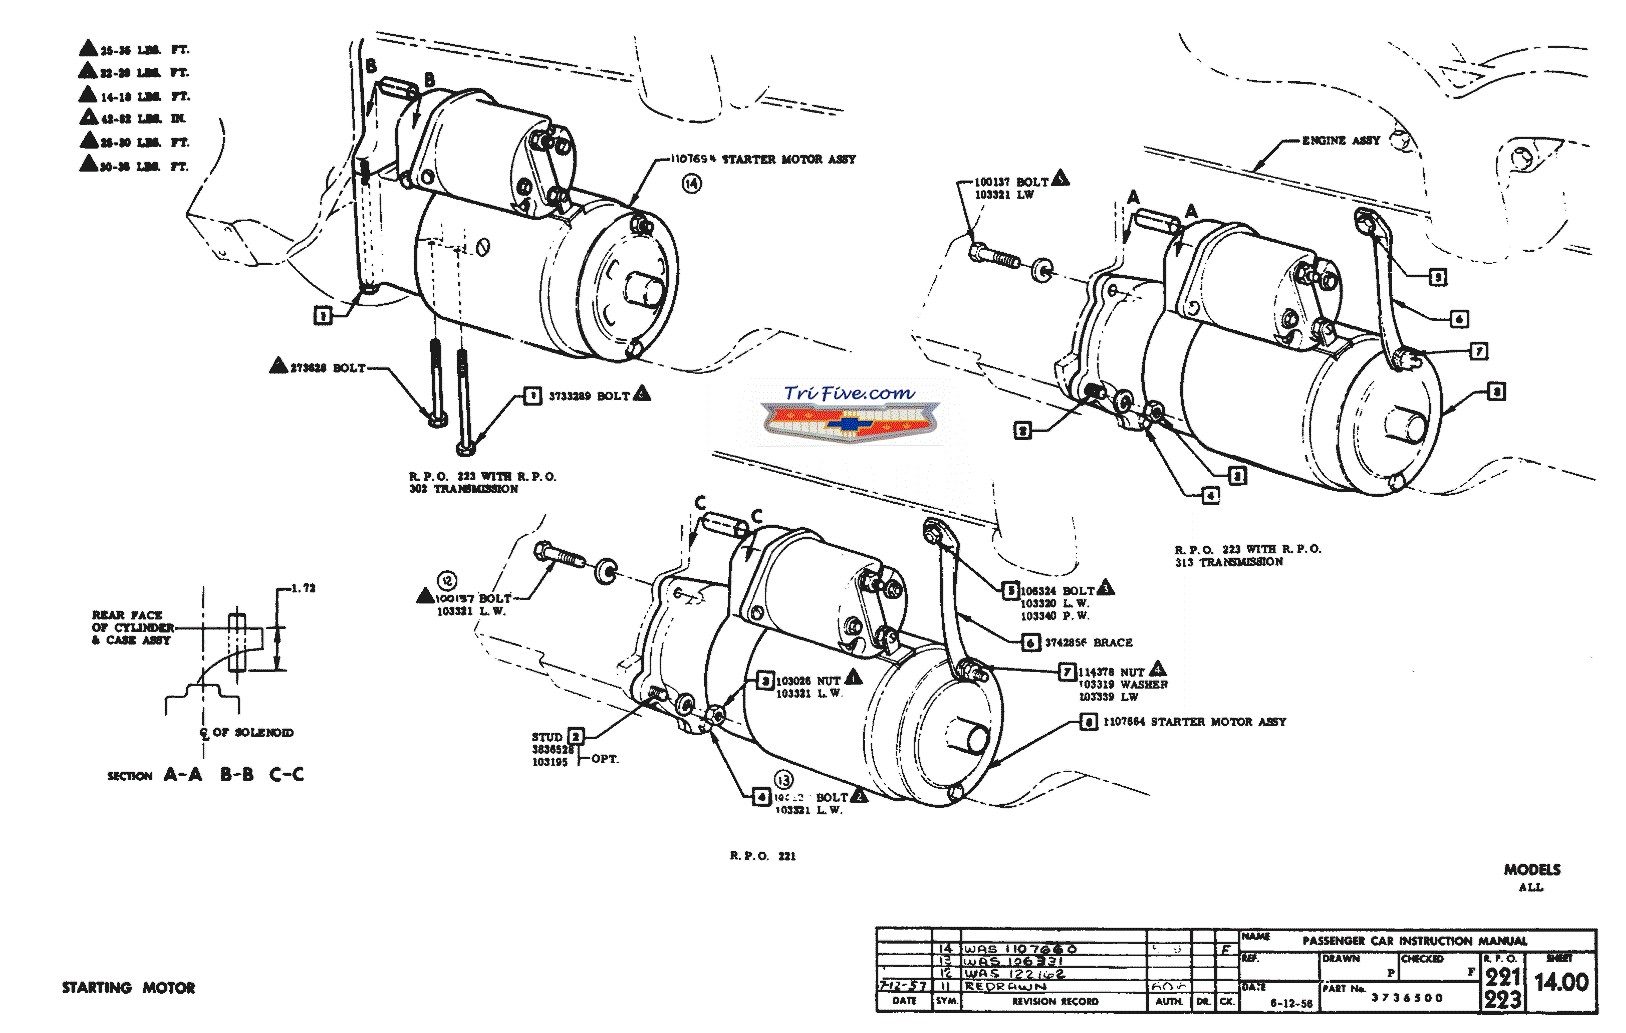 Chevy Starter Diagrams Wiring Diagram 1957 Chevy Starter Wiring Diagram 78 Chevy Starter Diagram